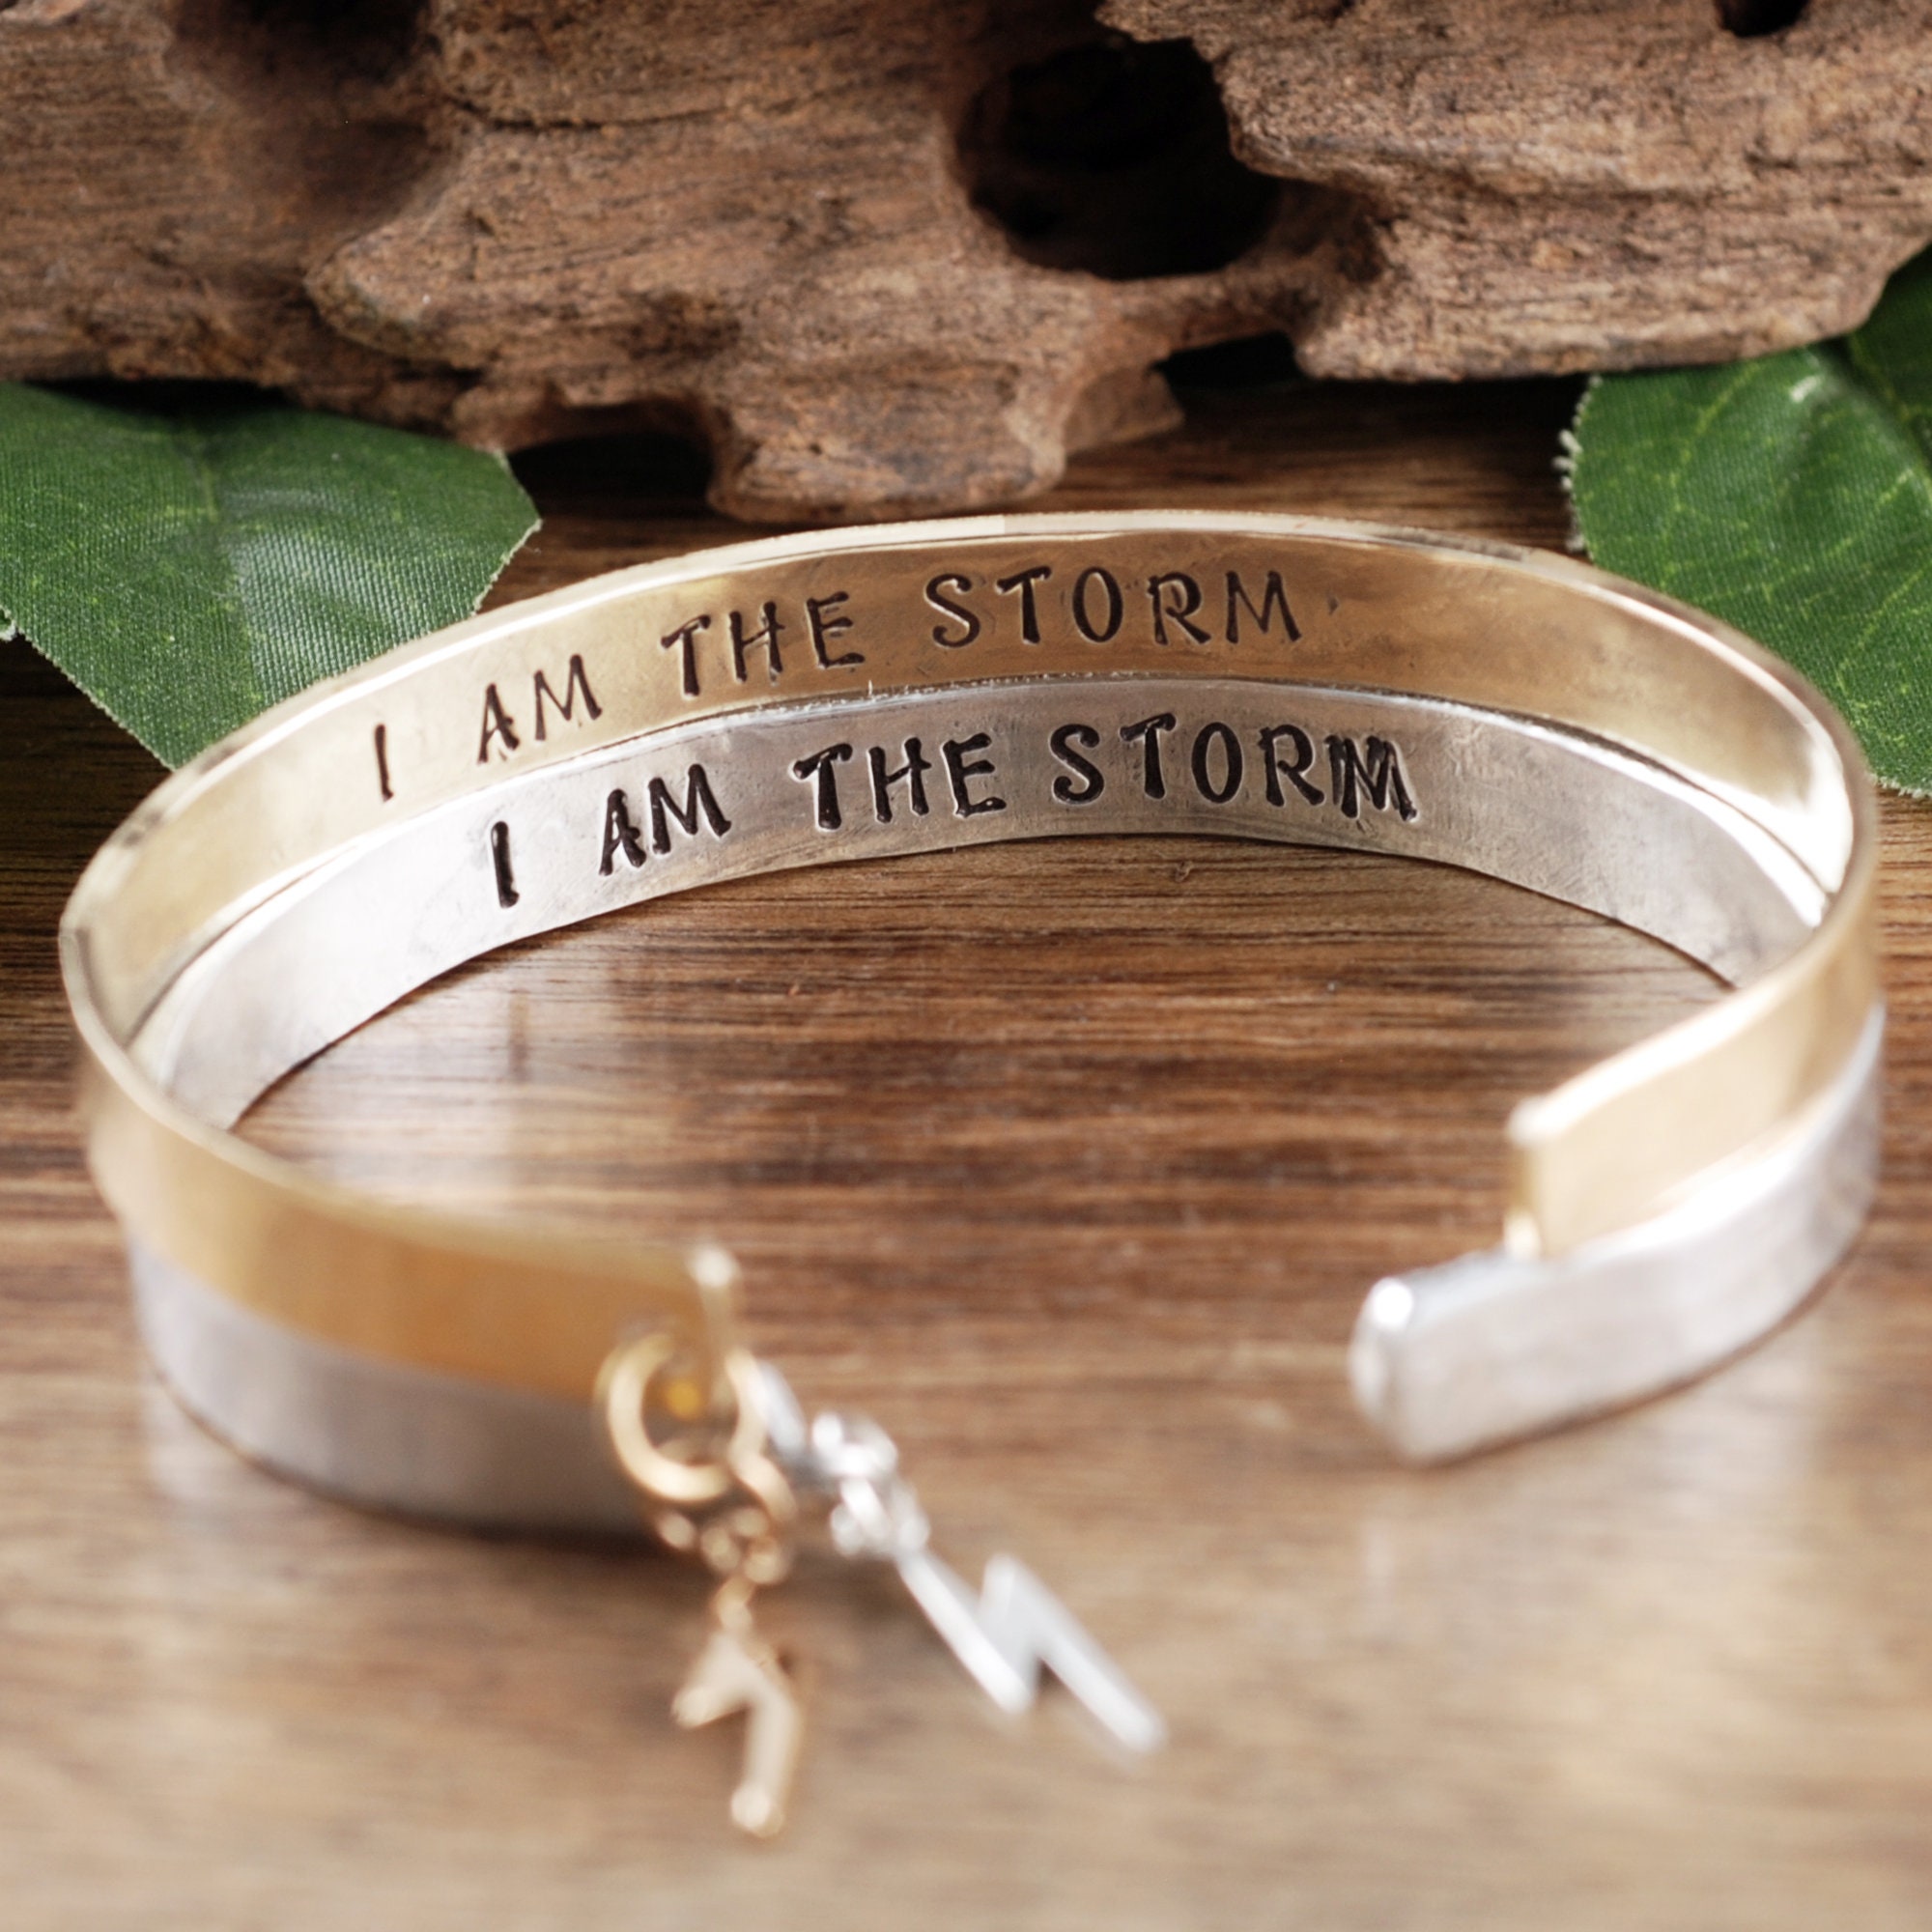 Fate whispered to the Warrior, I am the Storm Bracelet, Inspirational ...